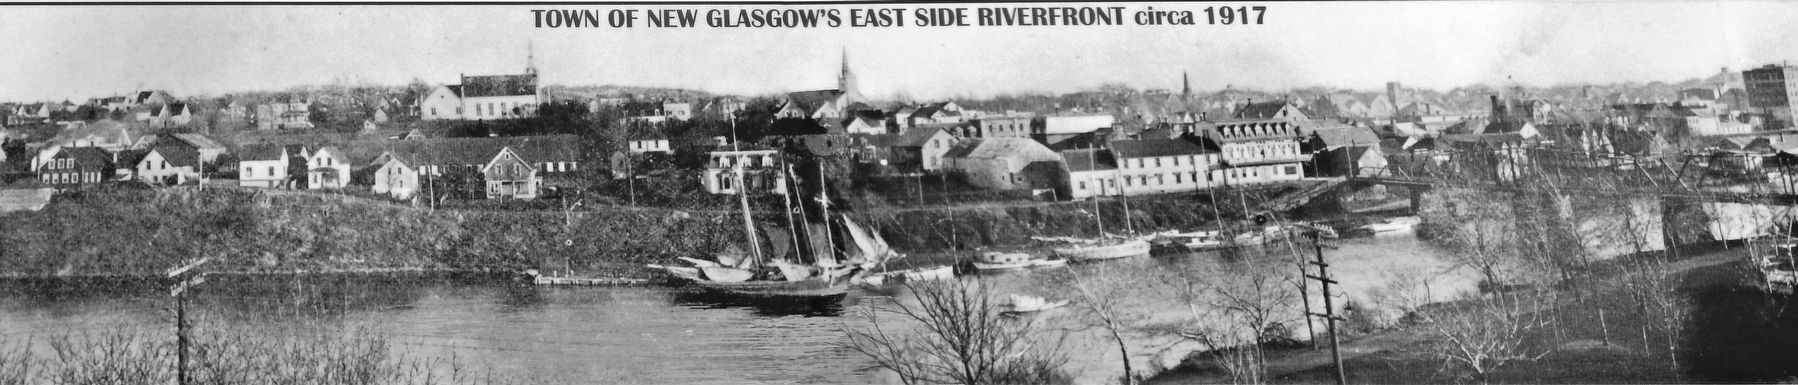 Marker detail: Town of New Glasgow’s East Side Riverfront circa 1917 image. Click for full size.